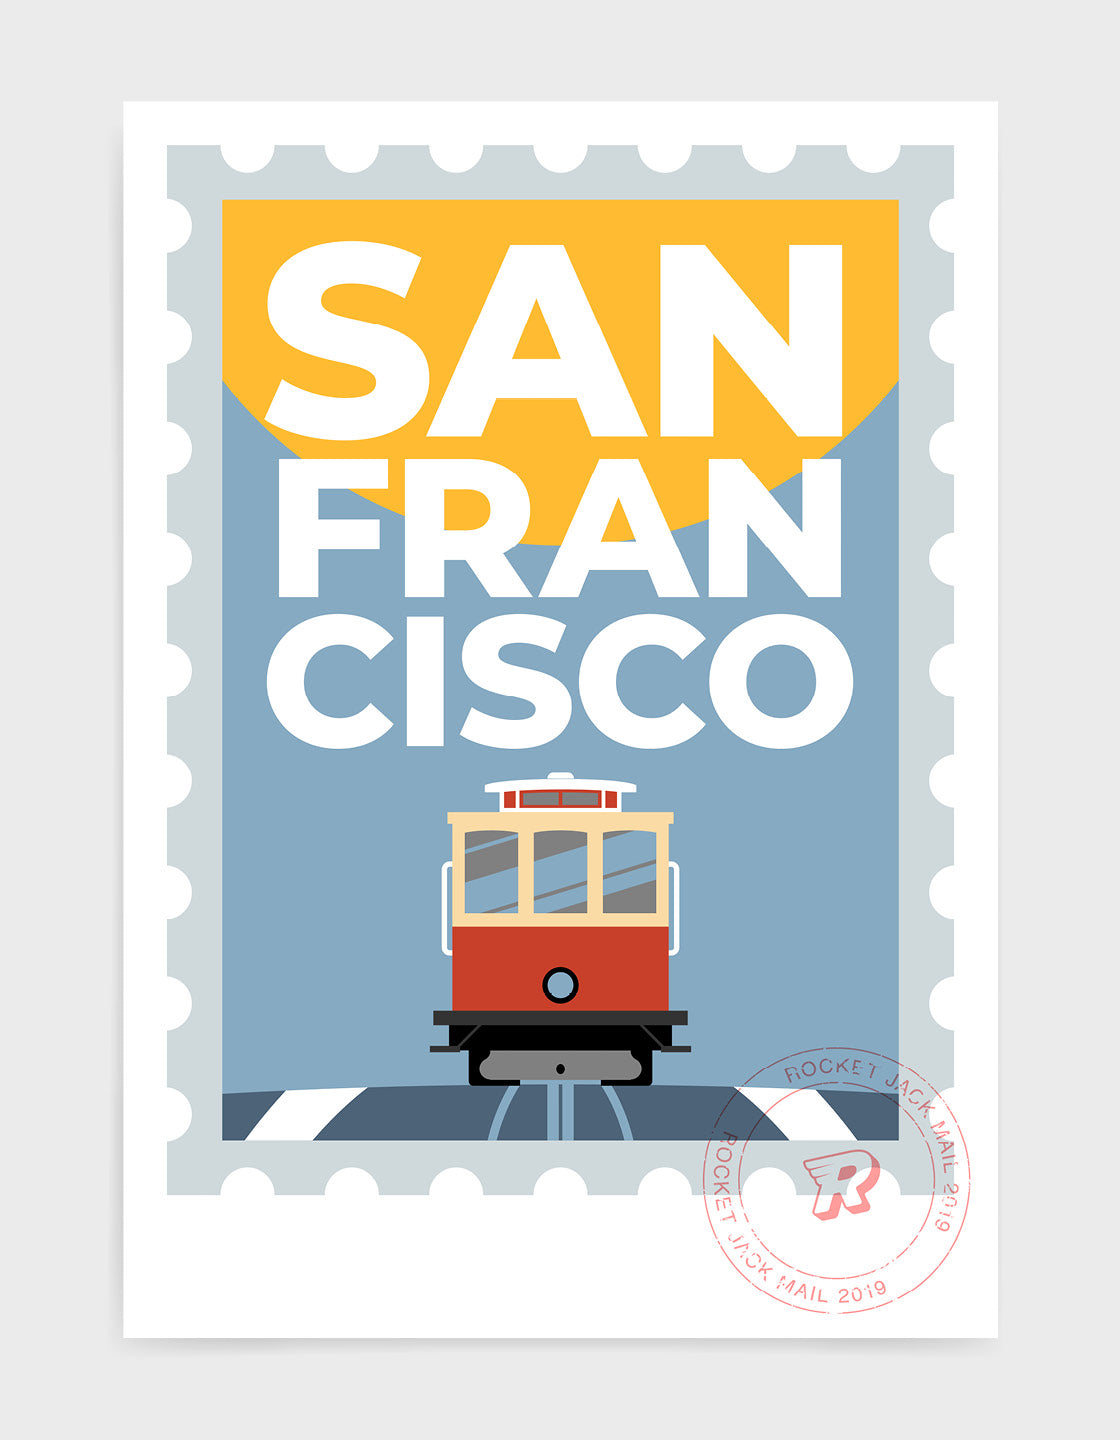 San Francisco stamp style travel poster featuring tram and city text on a grey and yellow background